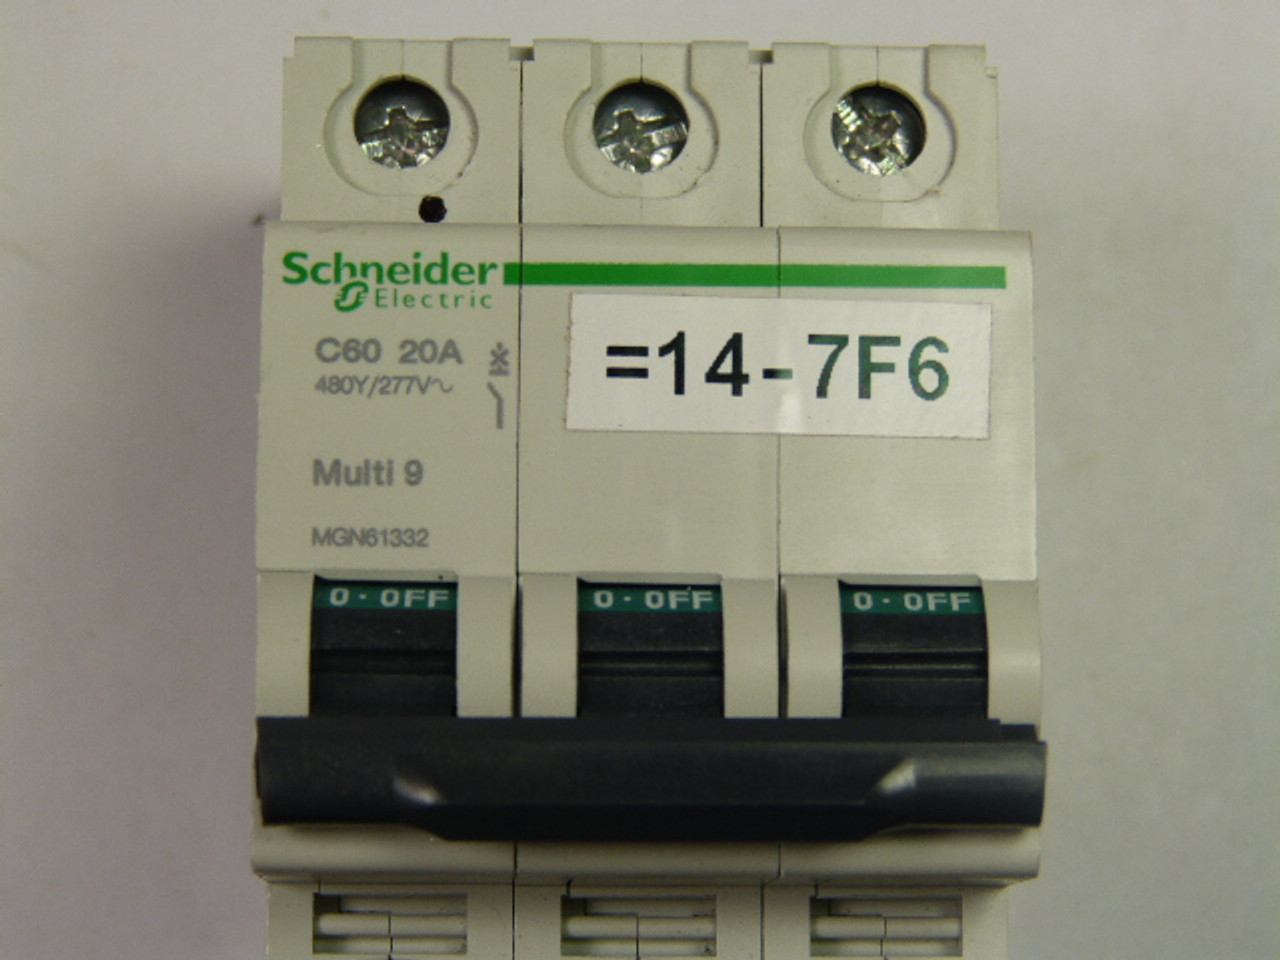 Schneider Electric MGN61332 3-Pole Circuit Breaker C60 20A USED